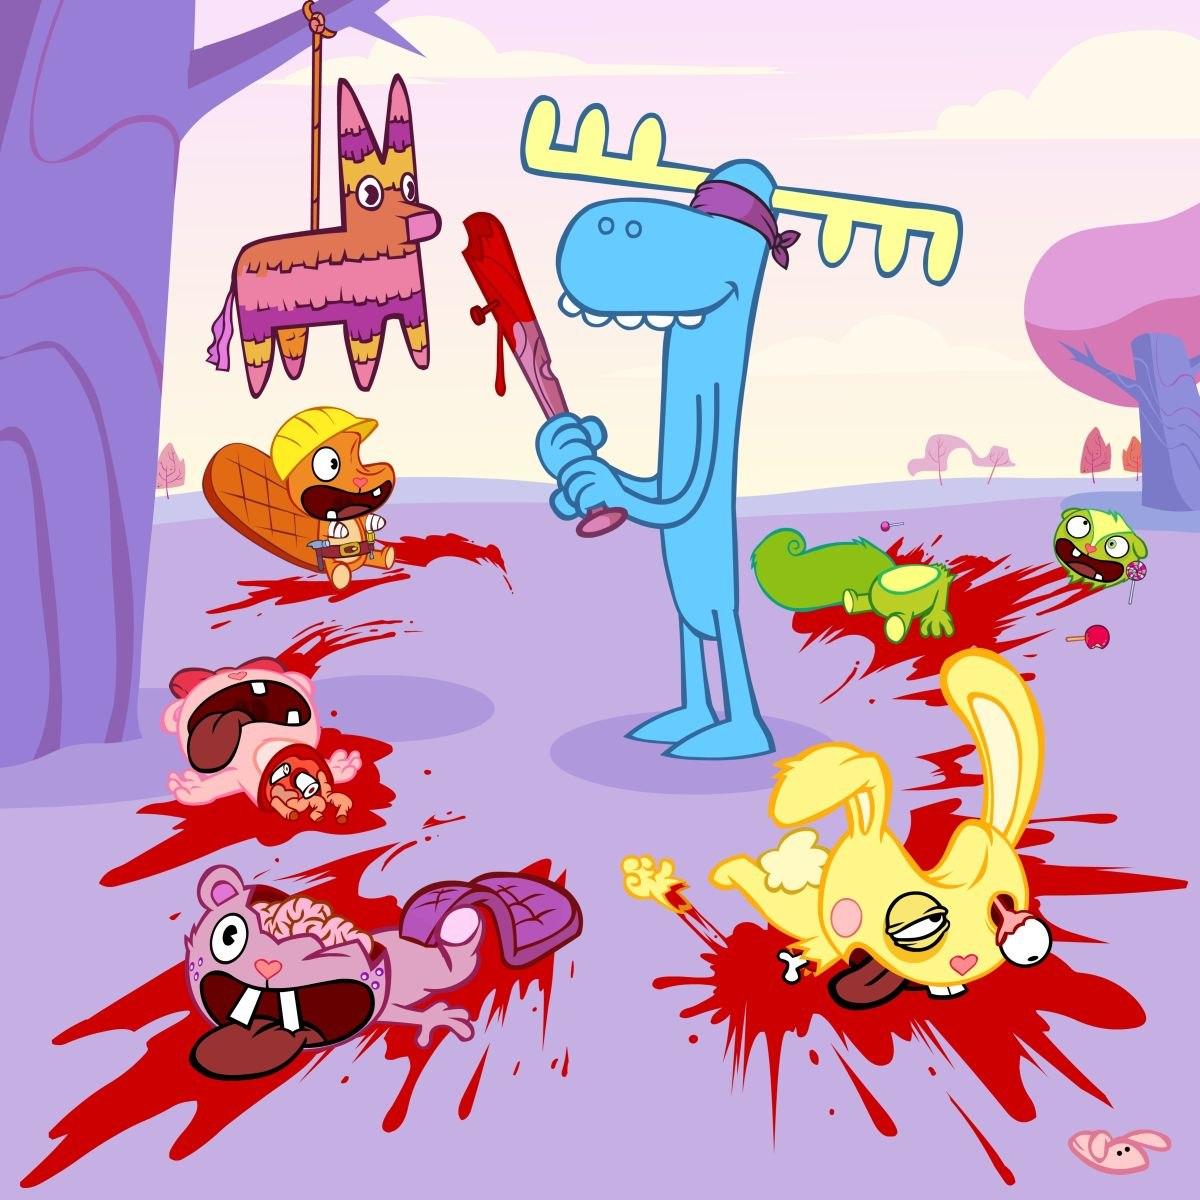 No Guts, No Gory: The Happy Tree Friends Complete Disaster DVD has